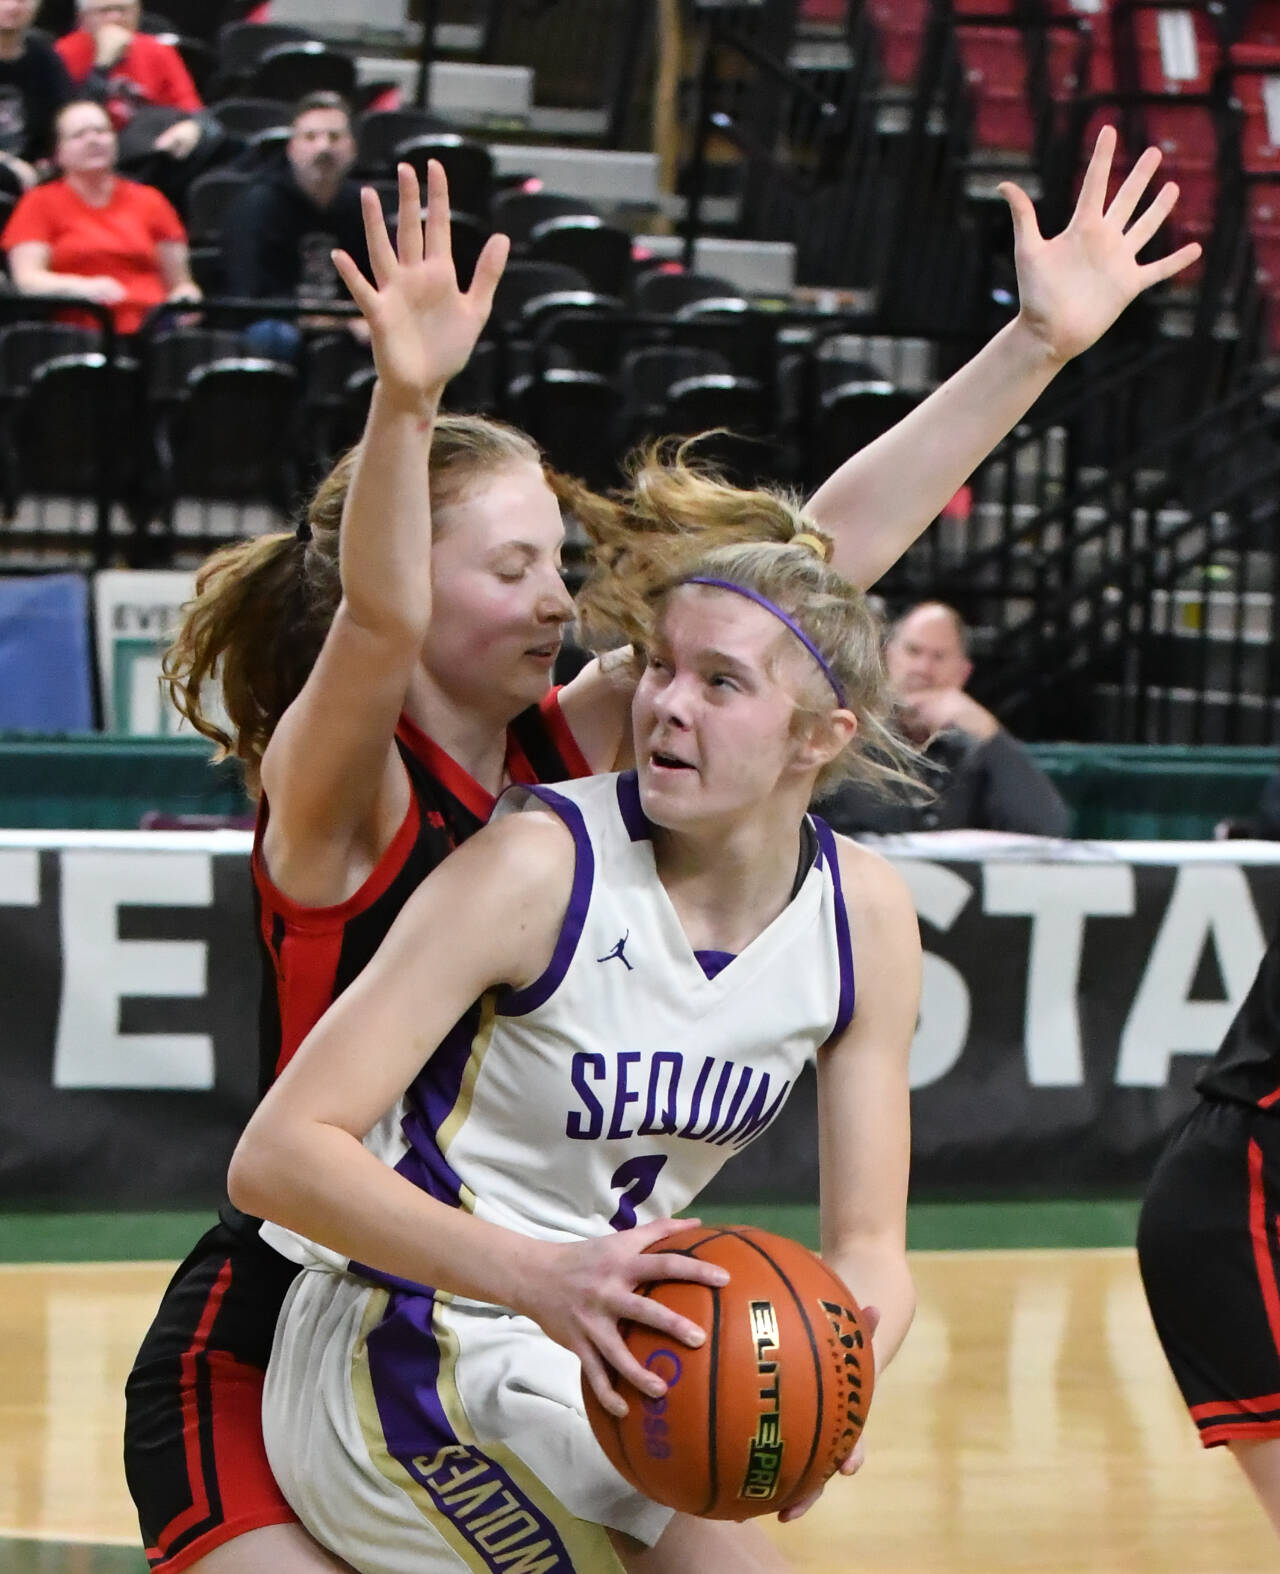 Photo by Jim Heintz / Sequim’s Jolene Vaara looks to score inside in the first half of SHS’s 57-37 win over Sammamish at the class 2A state tournament in Yakima on March 1. Vaara led the Wolves with 16 points.